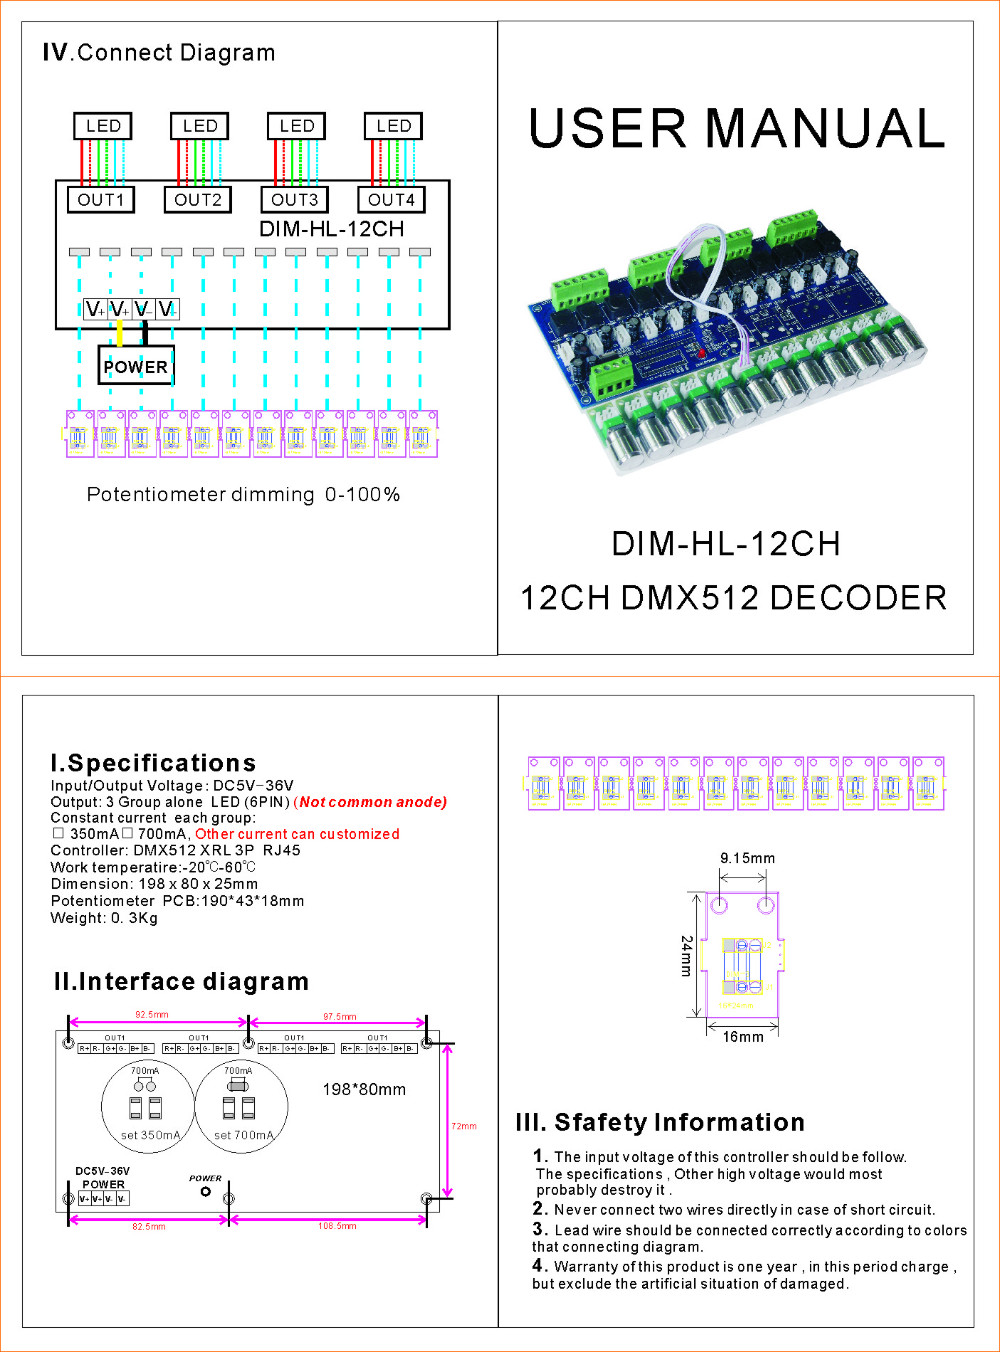 DMX_Controllers_and_Decoders_WS_DIM_12CH_700MA_3